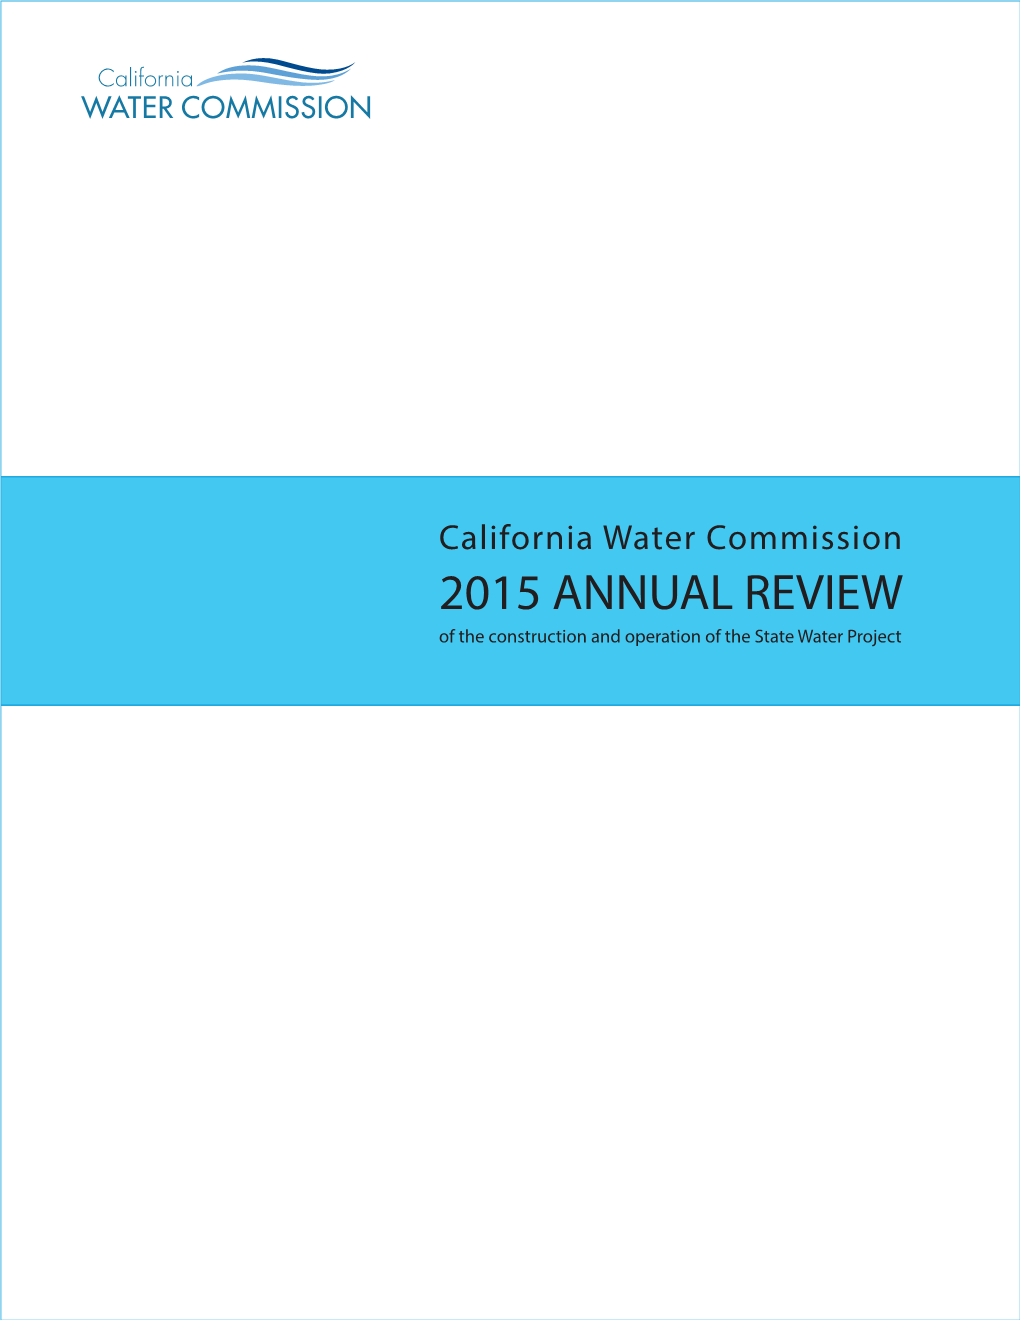 2015 Annual Review of the State Water Project